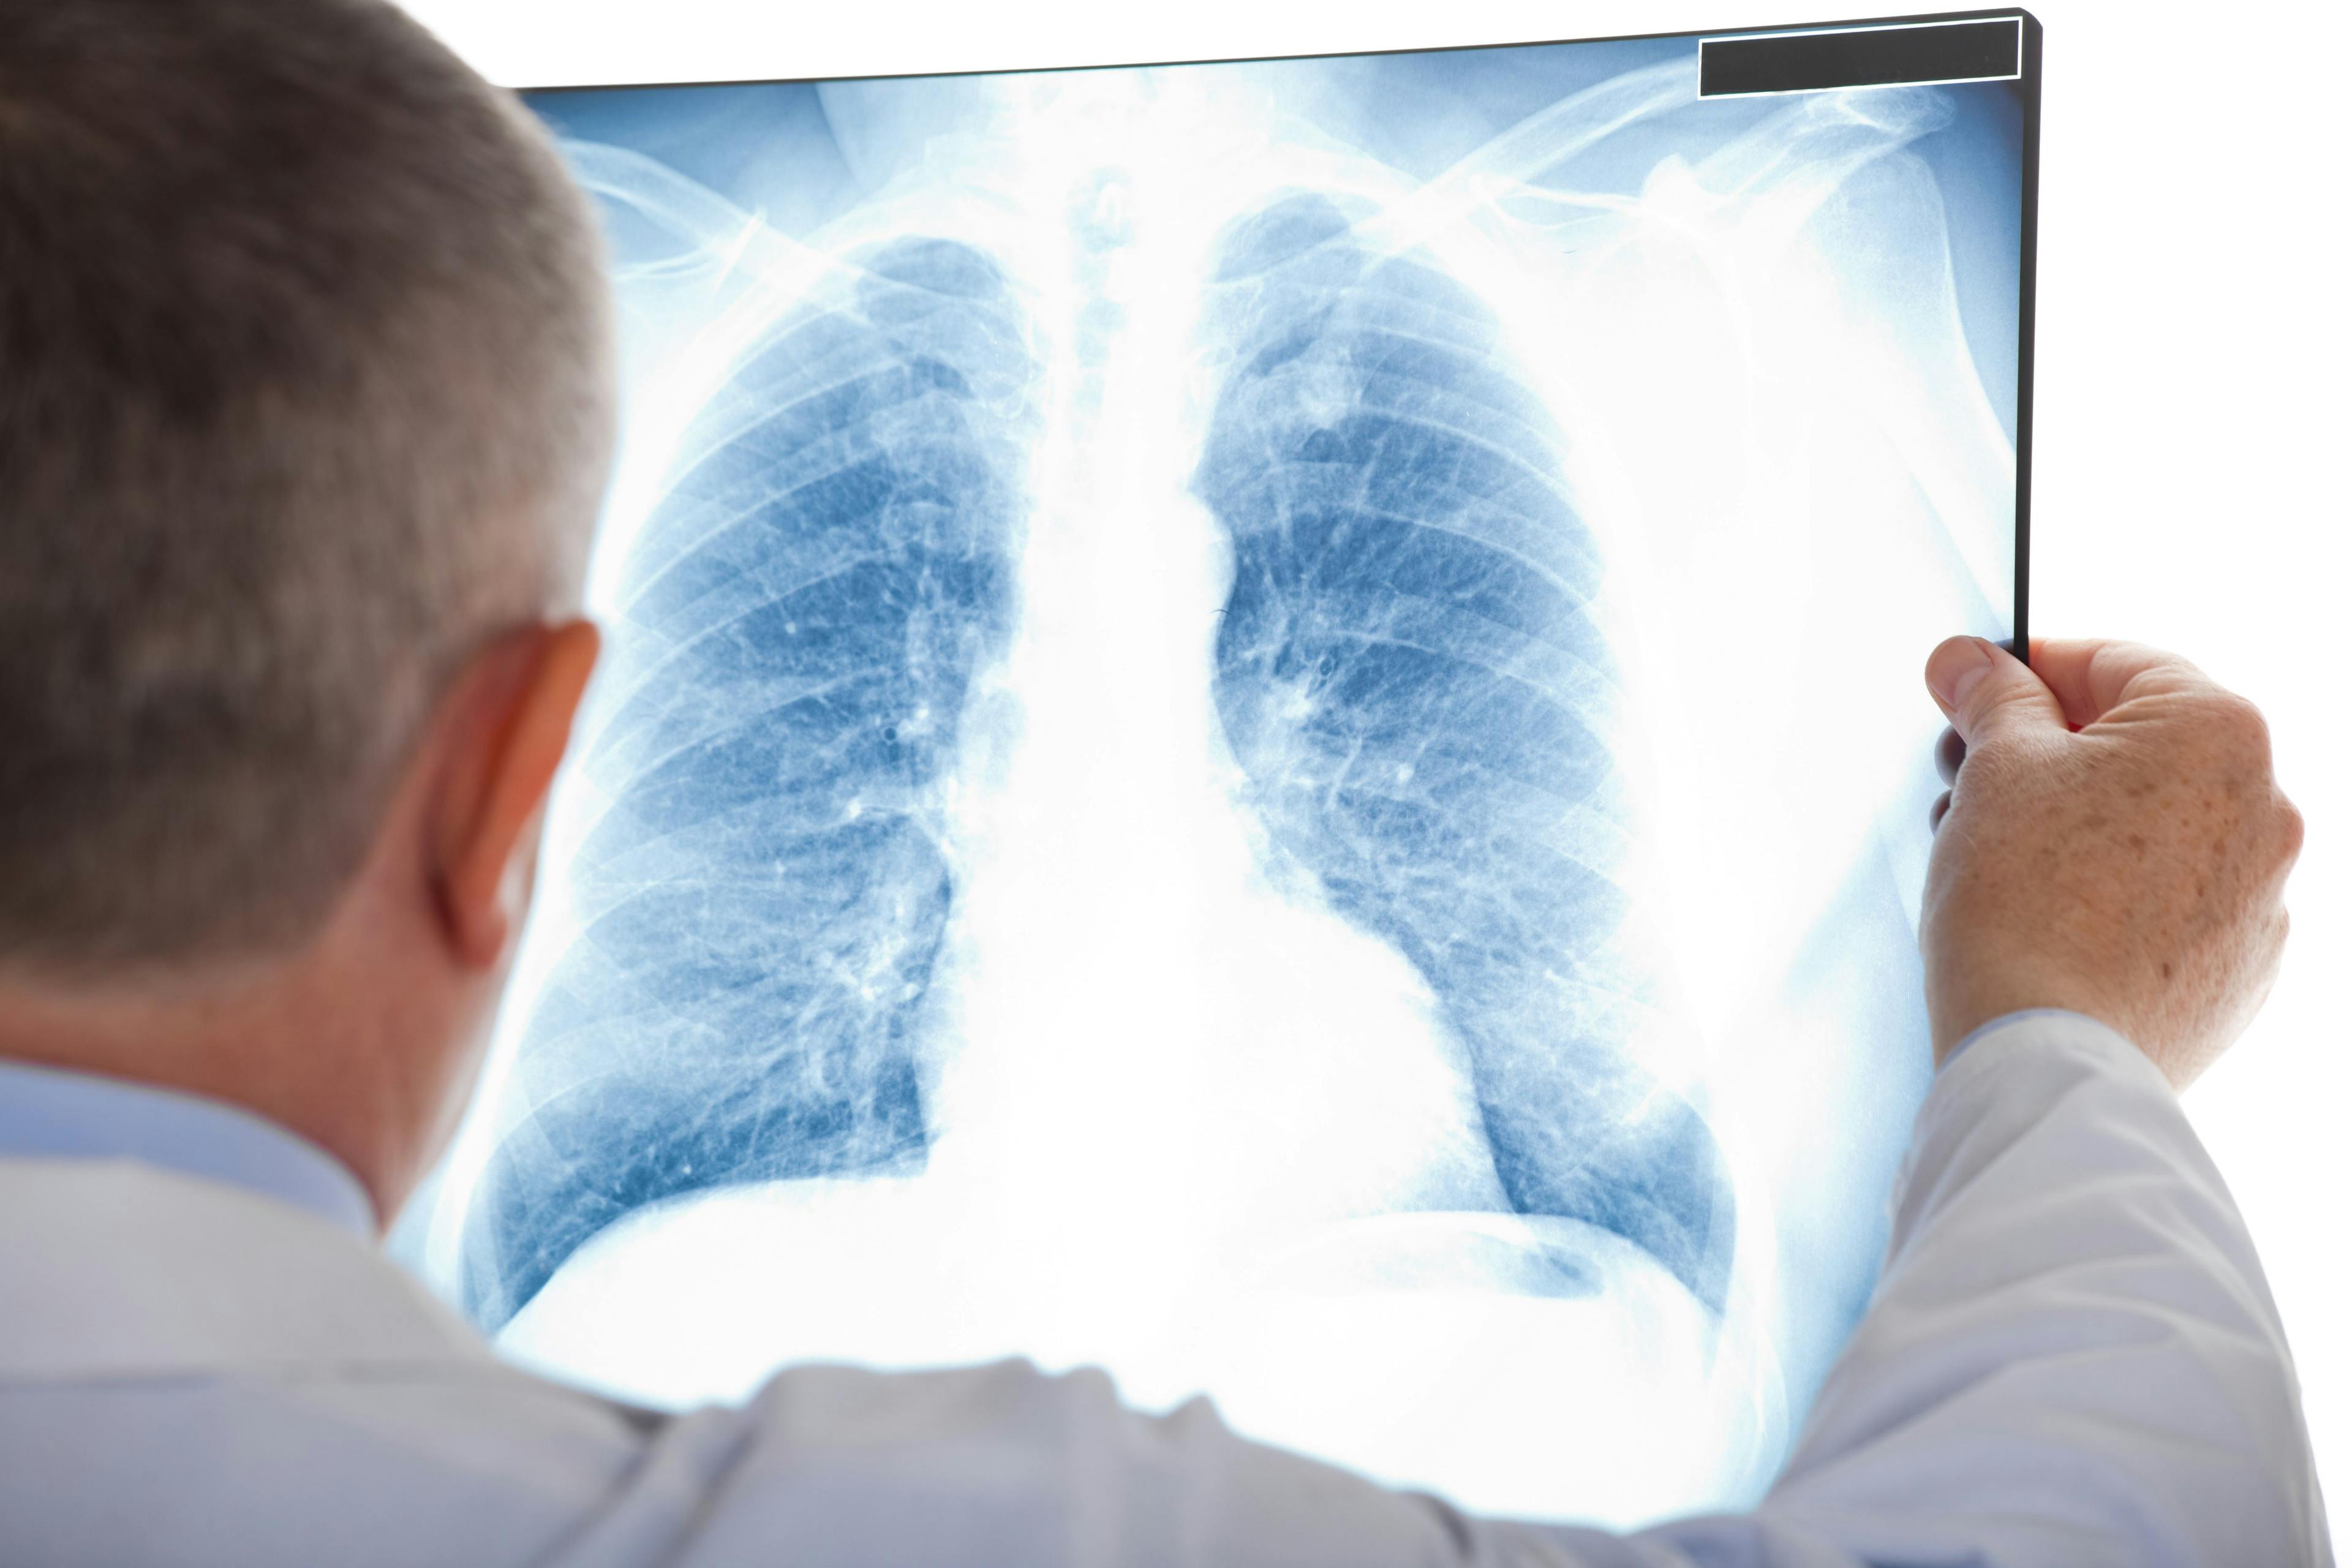 Study: Adherence to Recommended Lung Cancer Follow-Up Screening Remains Low